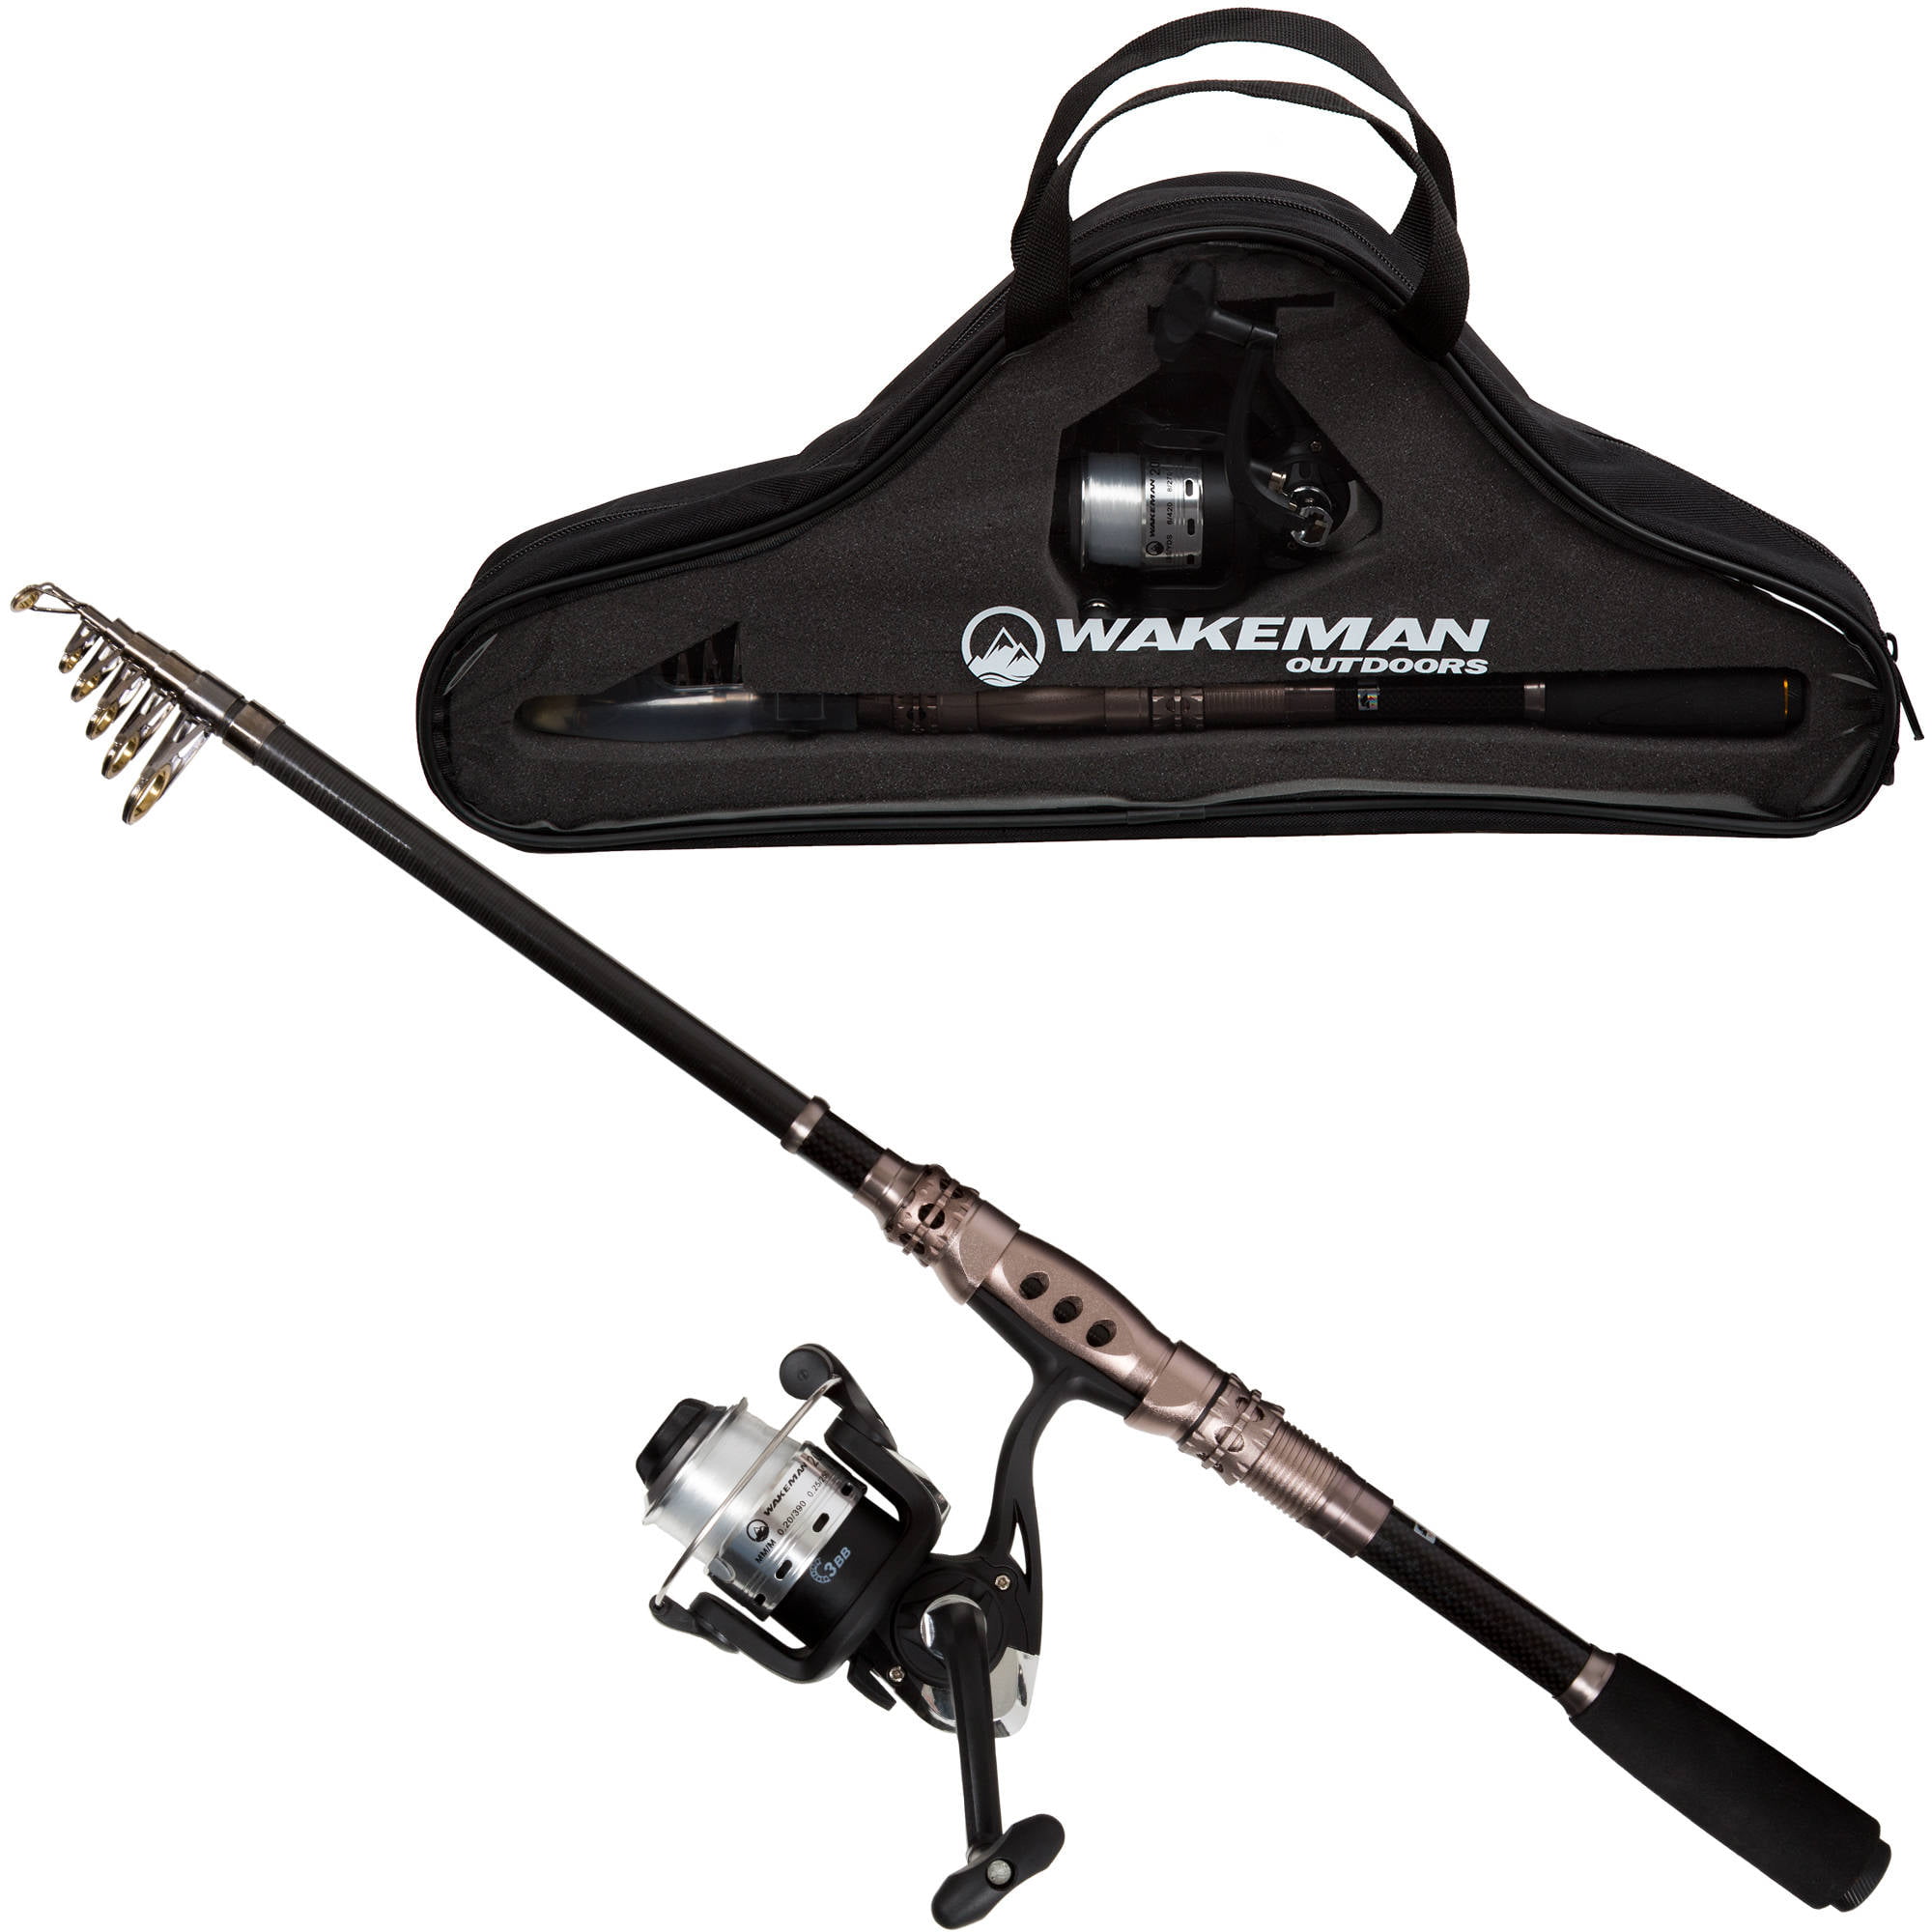 Hot Pink 78 Inches for sale online Wakeman Strike Series Spinning Rod and Reel Combo 